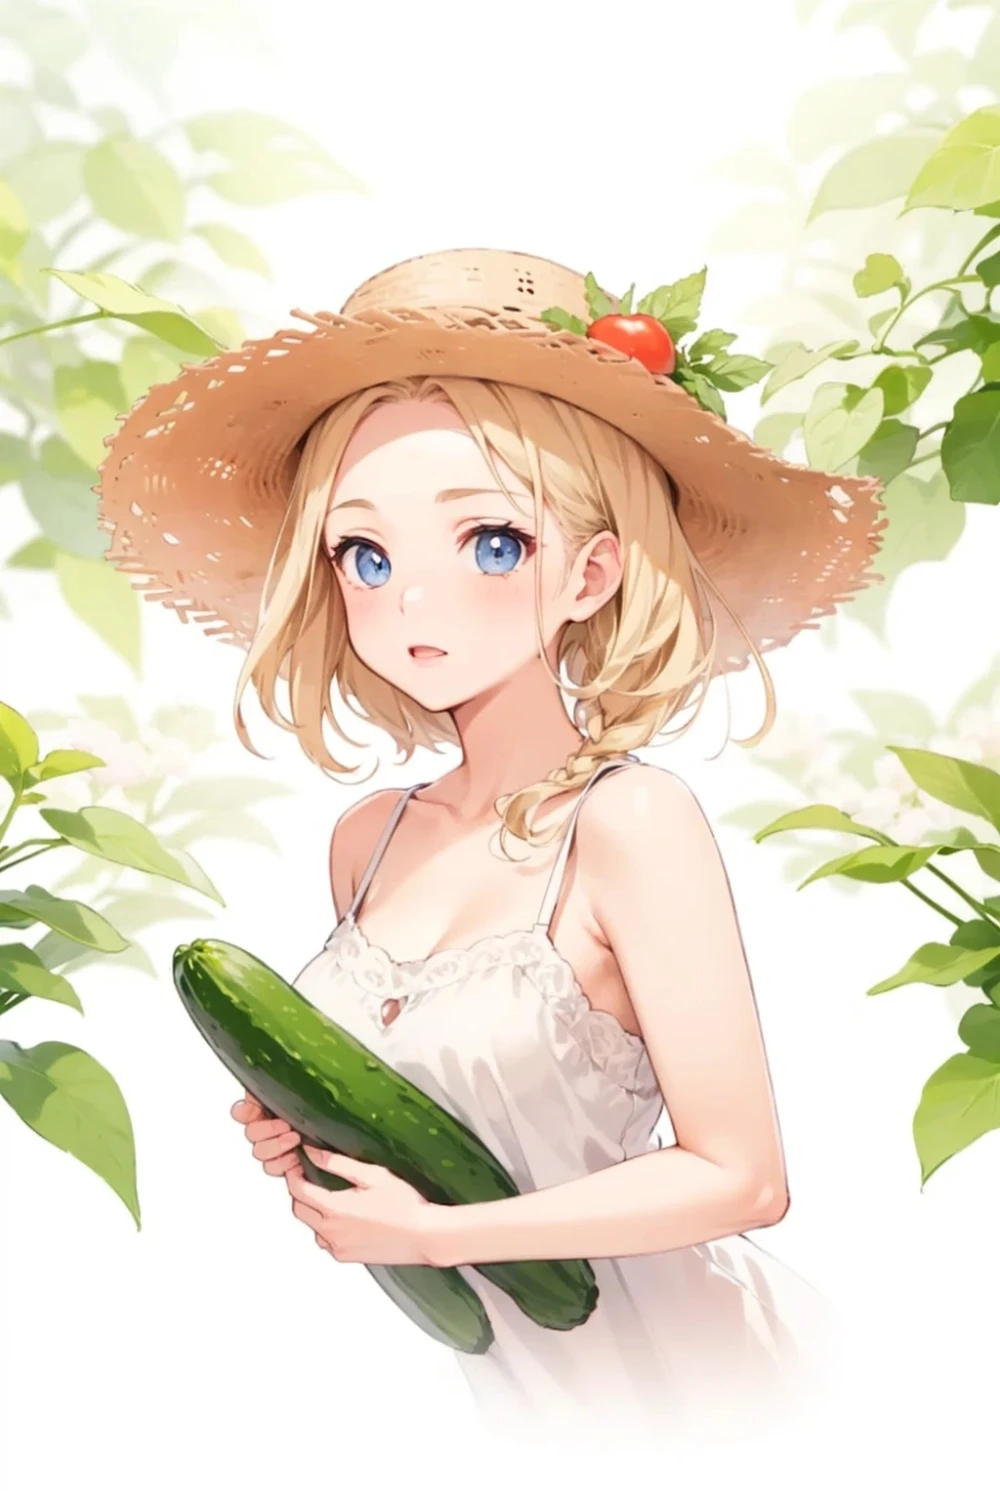 straw-hat -anime-style-all-ages-47